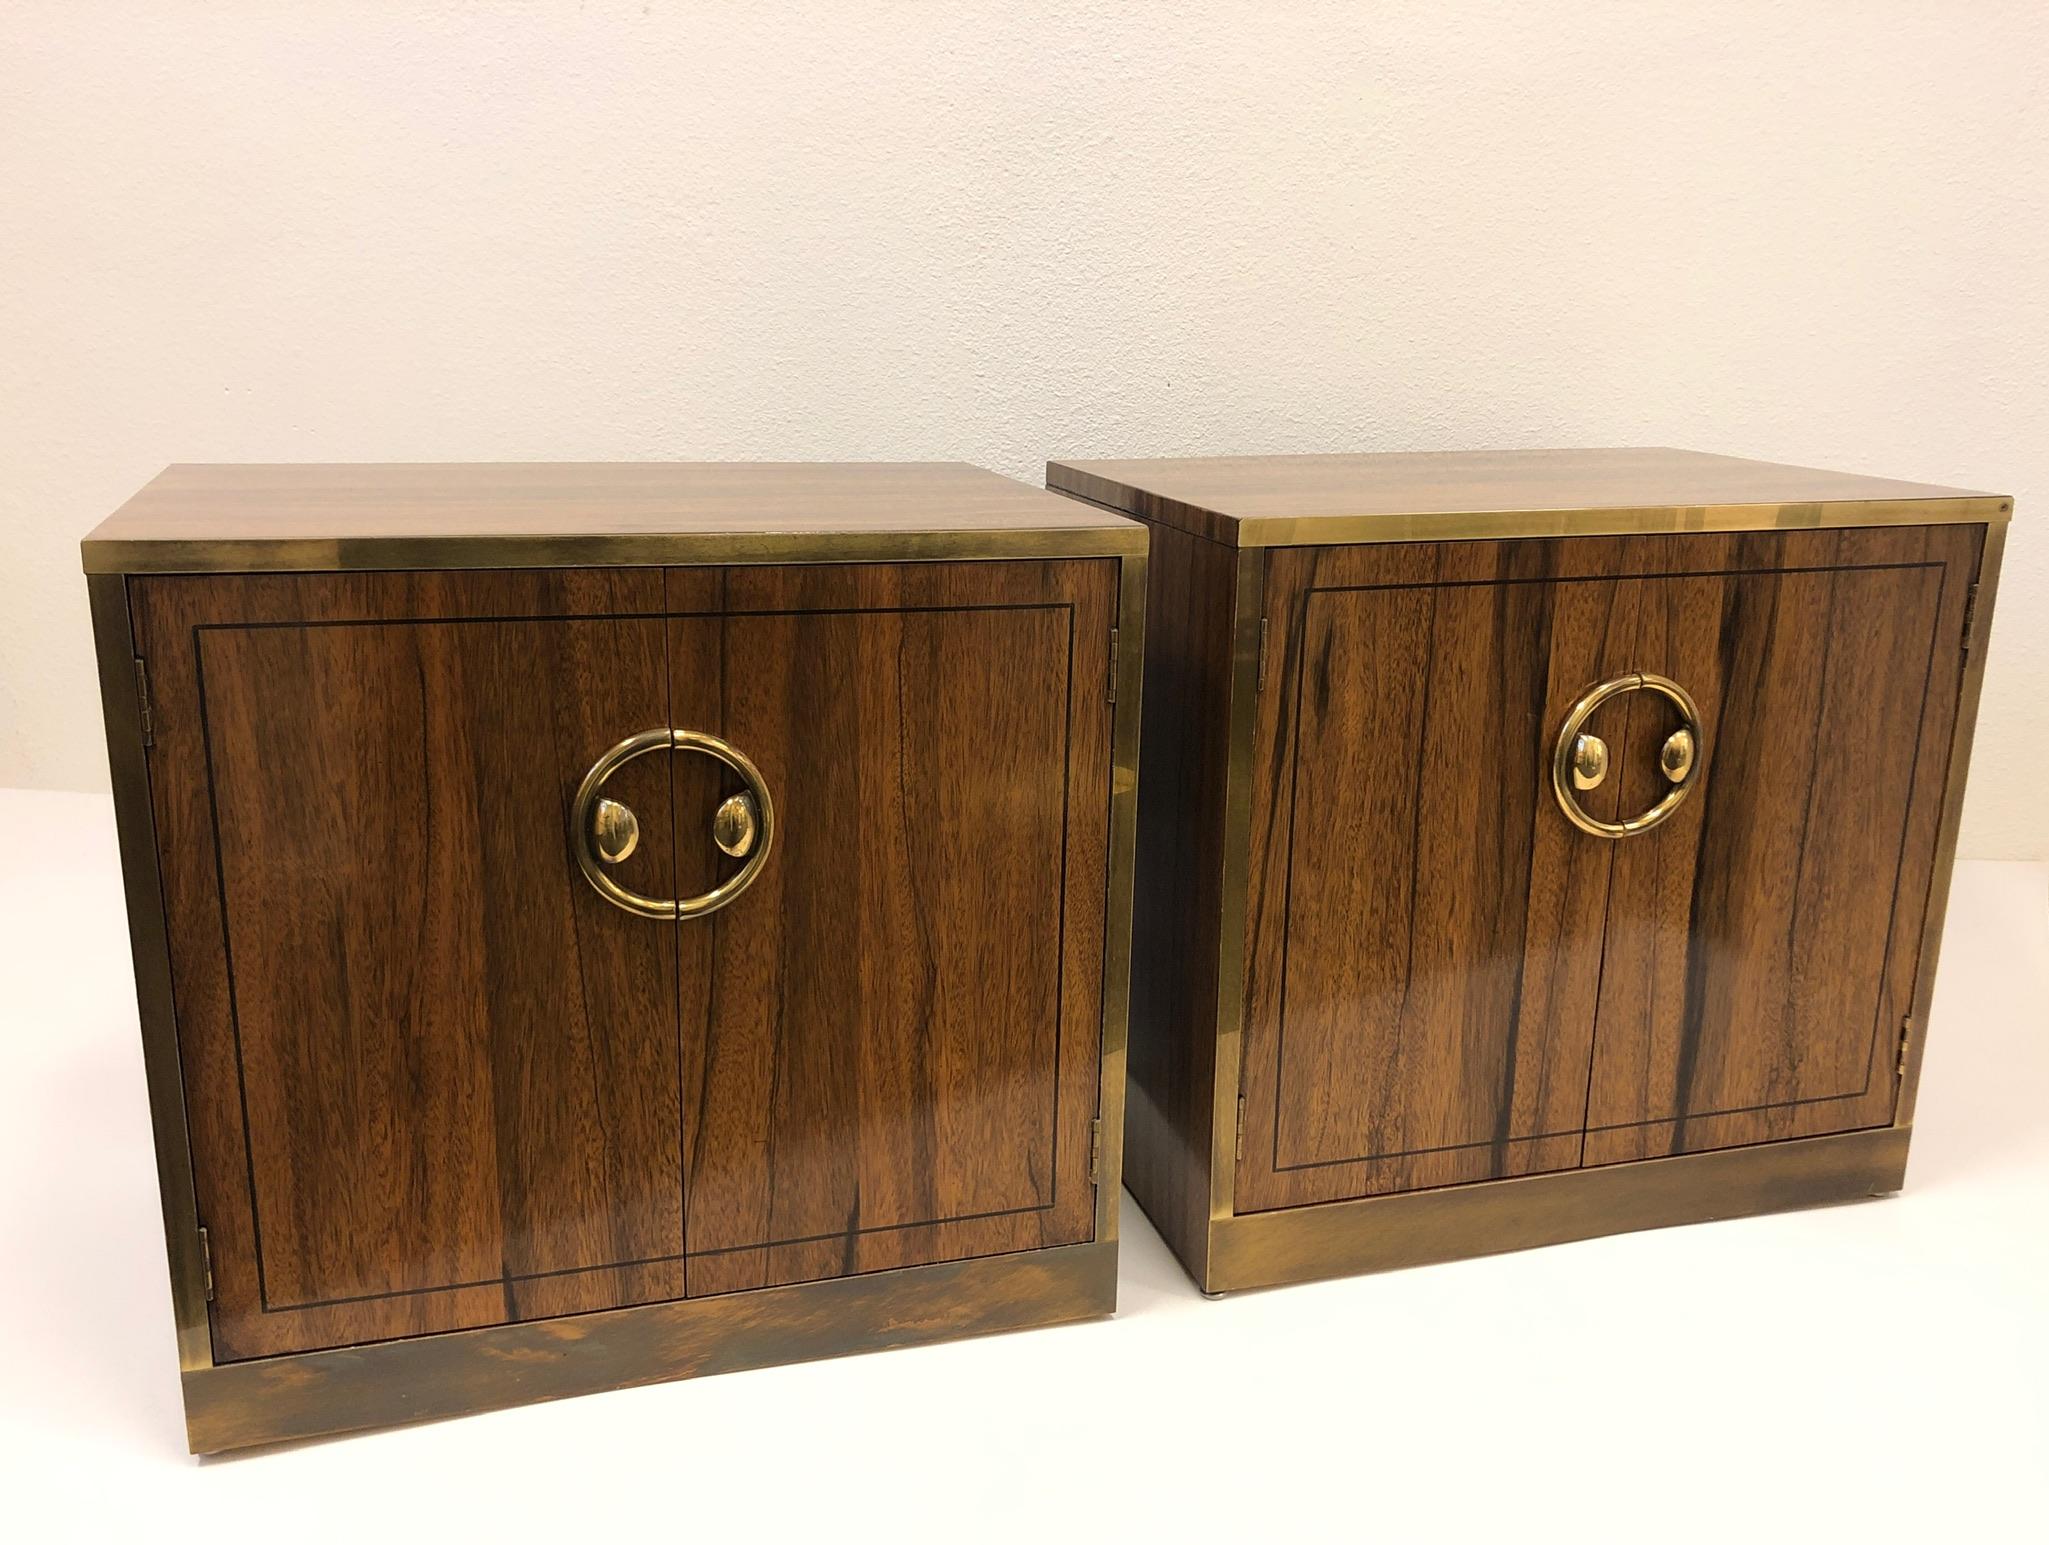 Pair of Zebra Wood and Brass Nightstands by Mastercraft 2